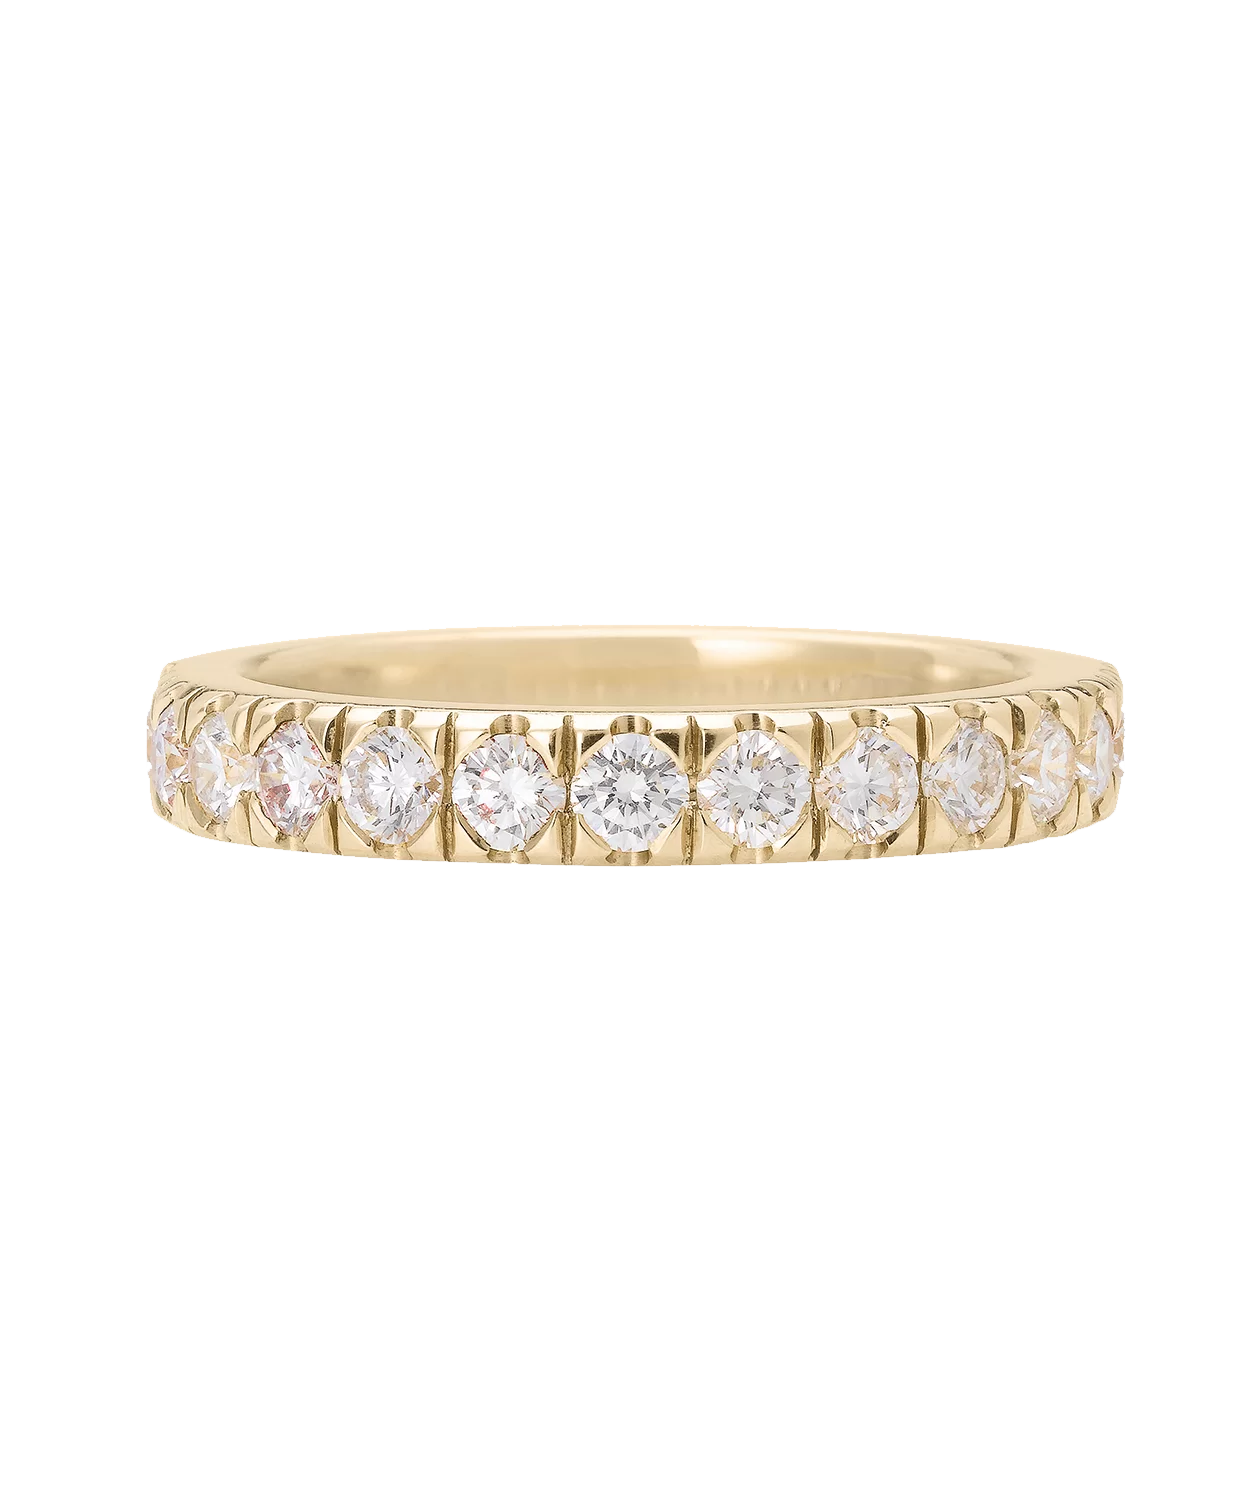 0.25ct Diamond Eternity Ring | First State Auctions New Zealand